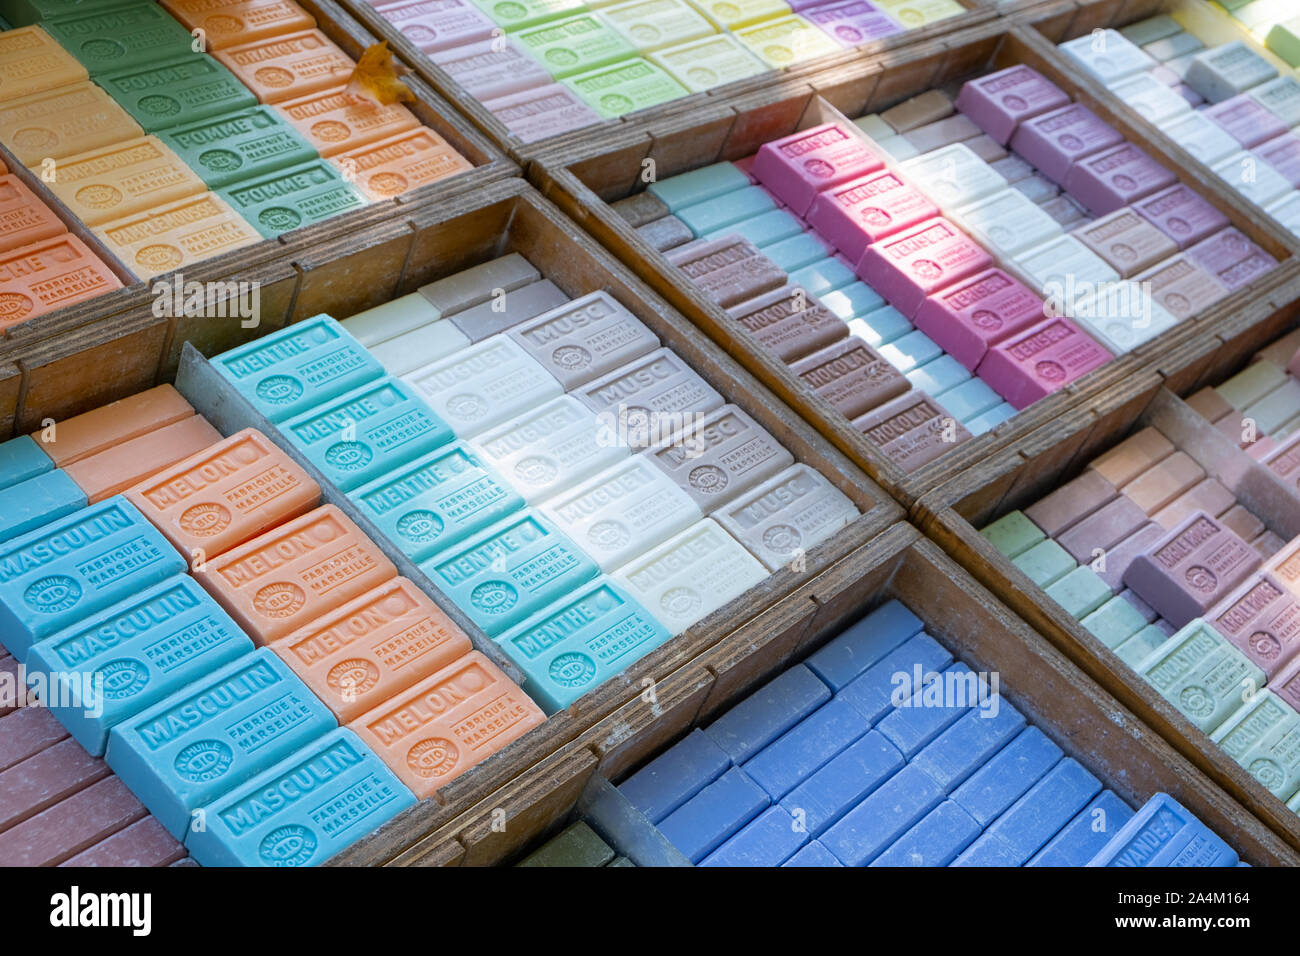 Marseilles soap, the perfumes of france. Many flavours, colours and perfumes in handmade soap made from olive oil, sold on market stalls Stock Photo